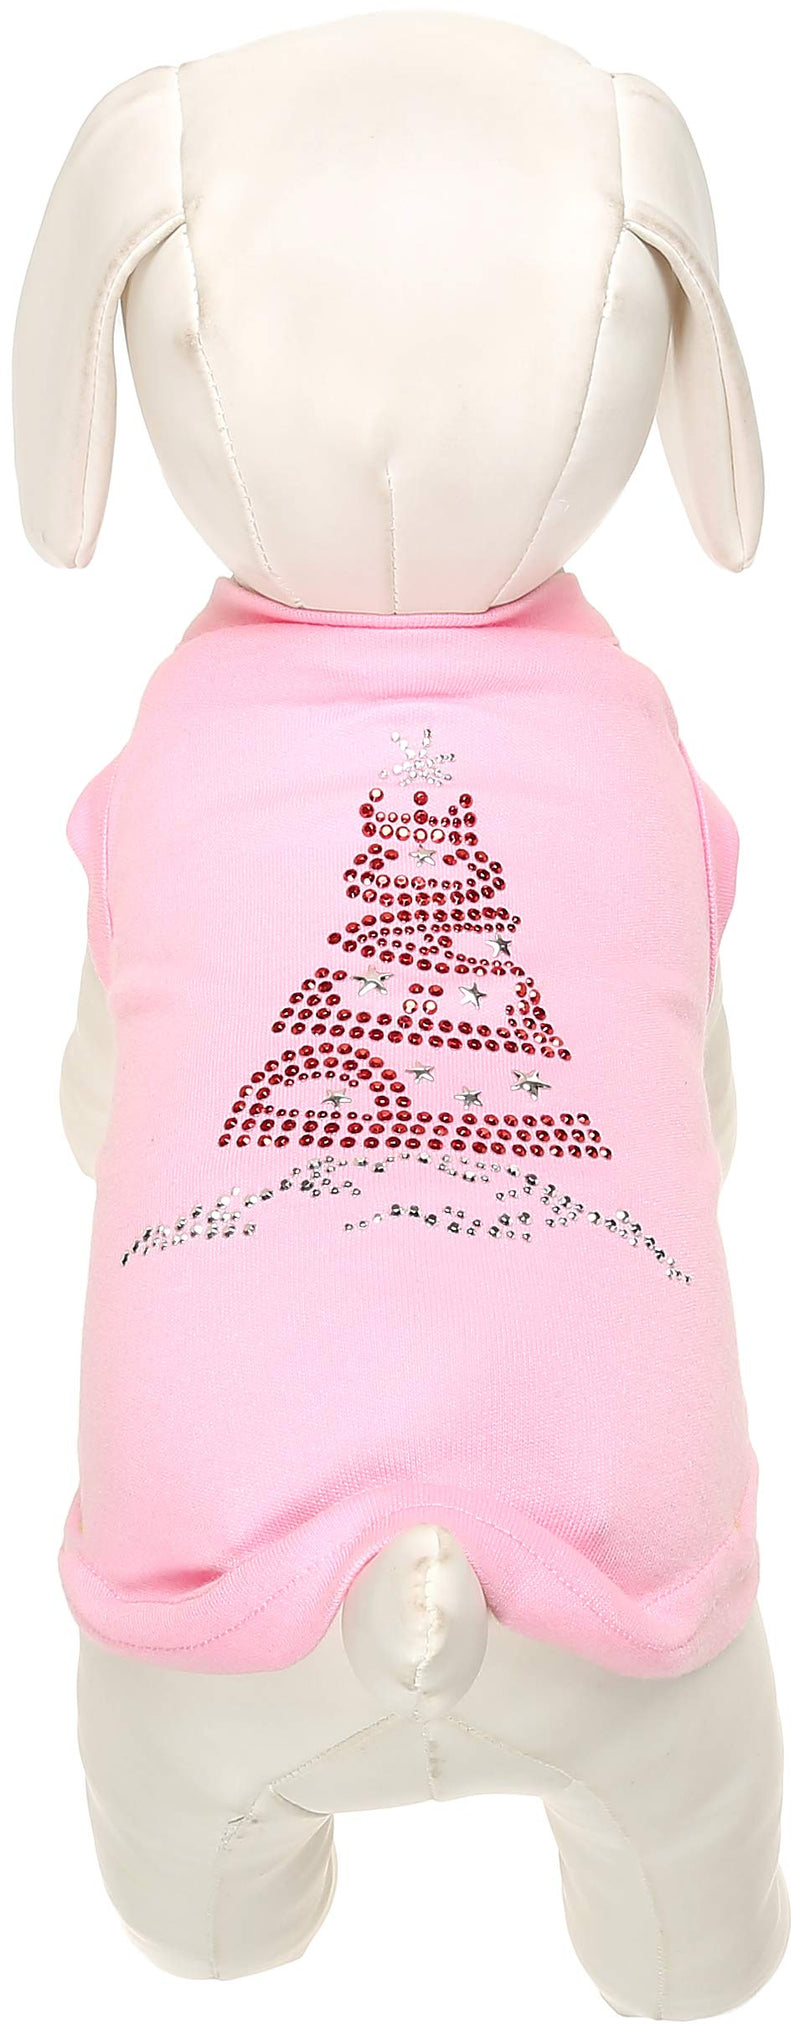 [Australia] - Mirage Pet Products 12-Inch Peace Tree Print Shirt for Pets, Medium, Bright Pink 